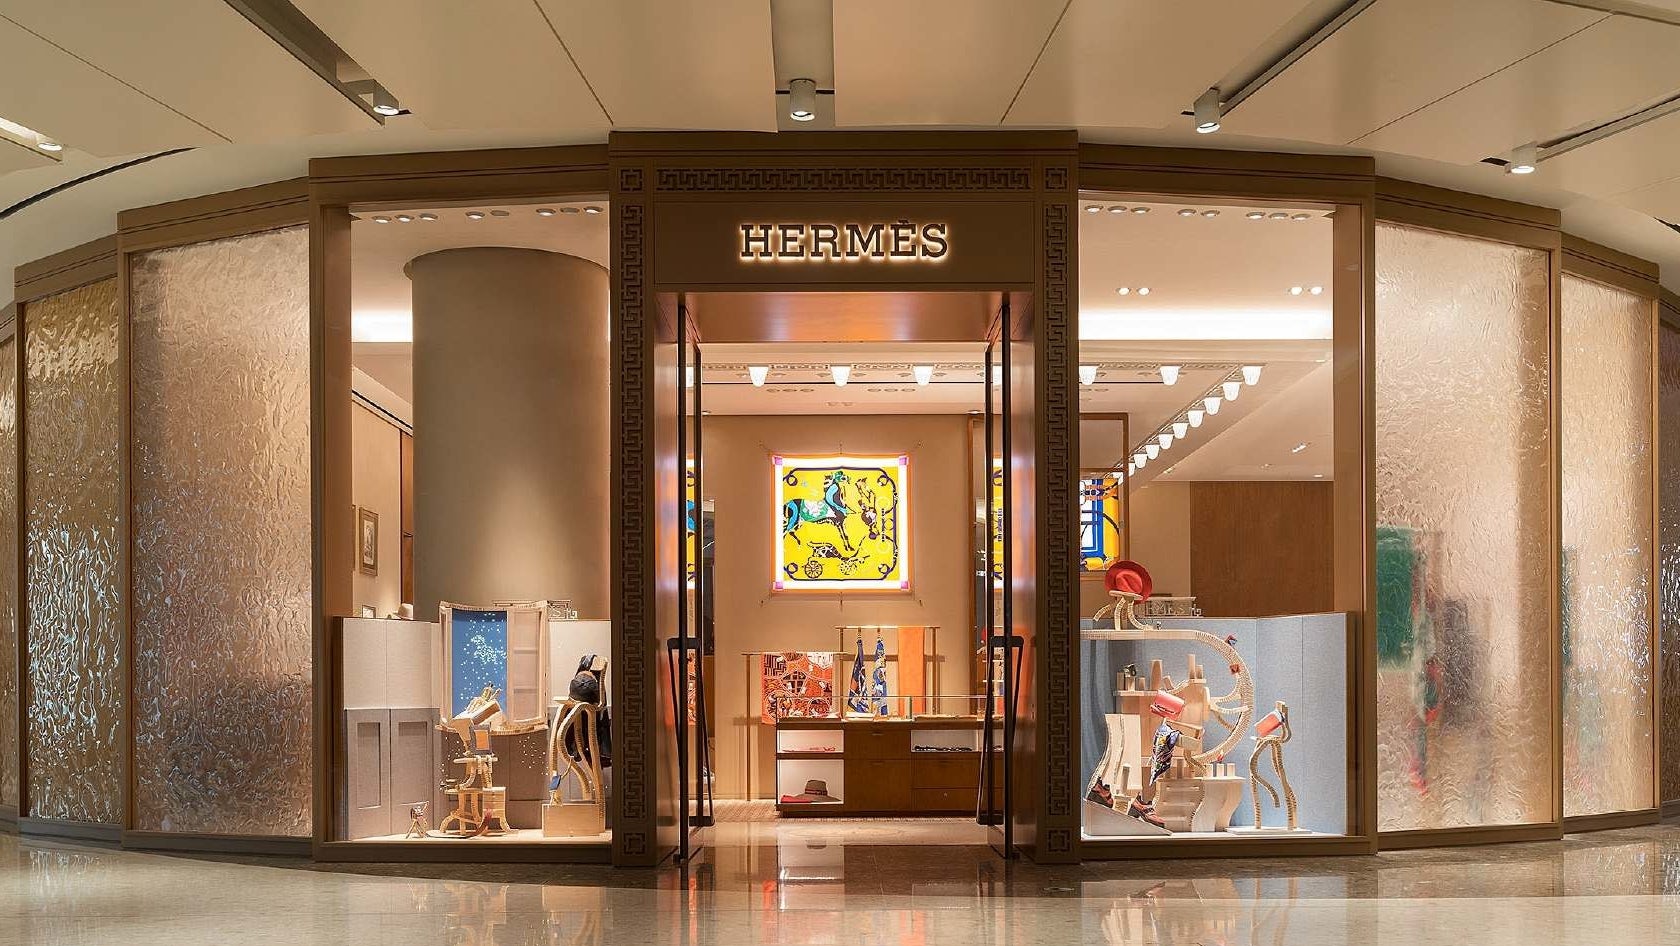 Luxury in the Time of Covid- 19: Hermes and Louis Vuitton – The